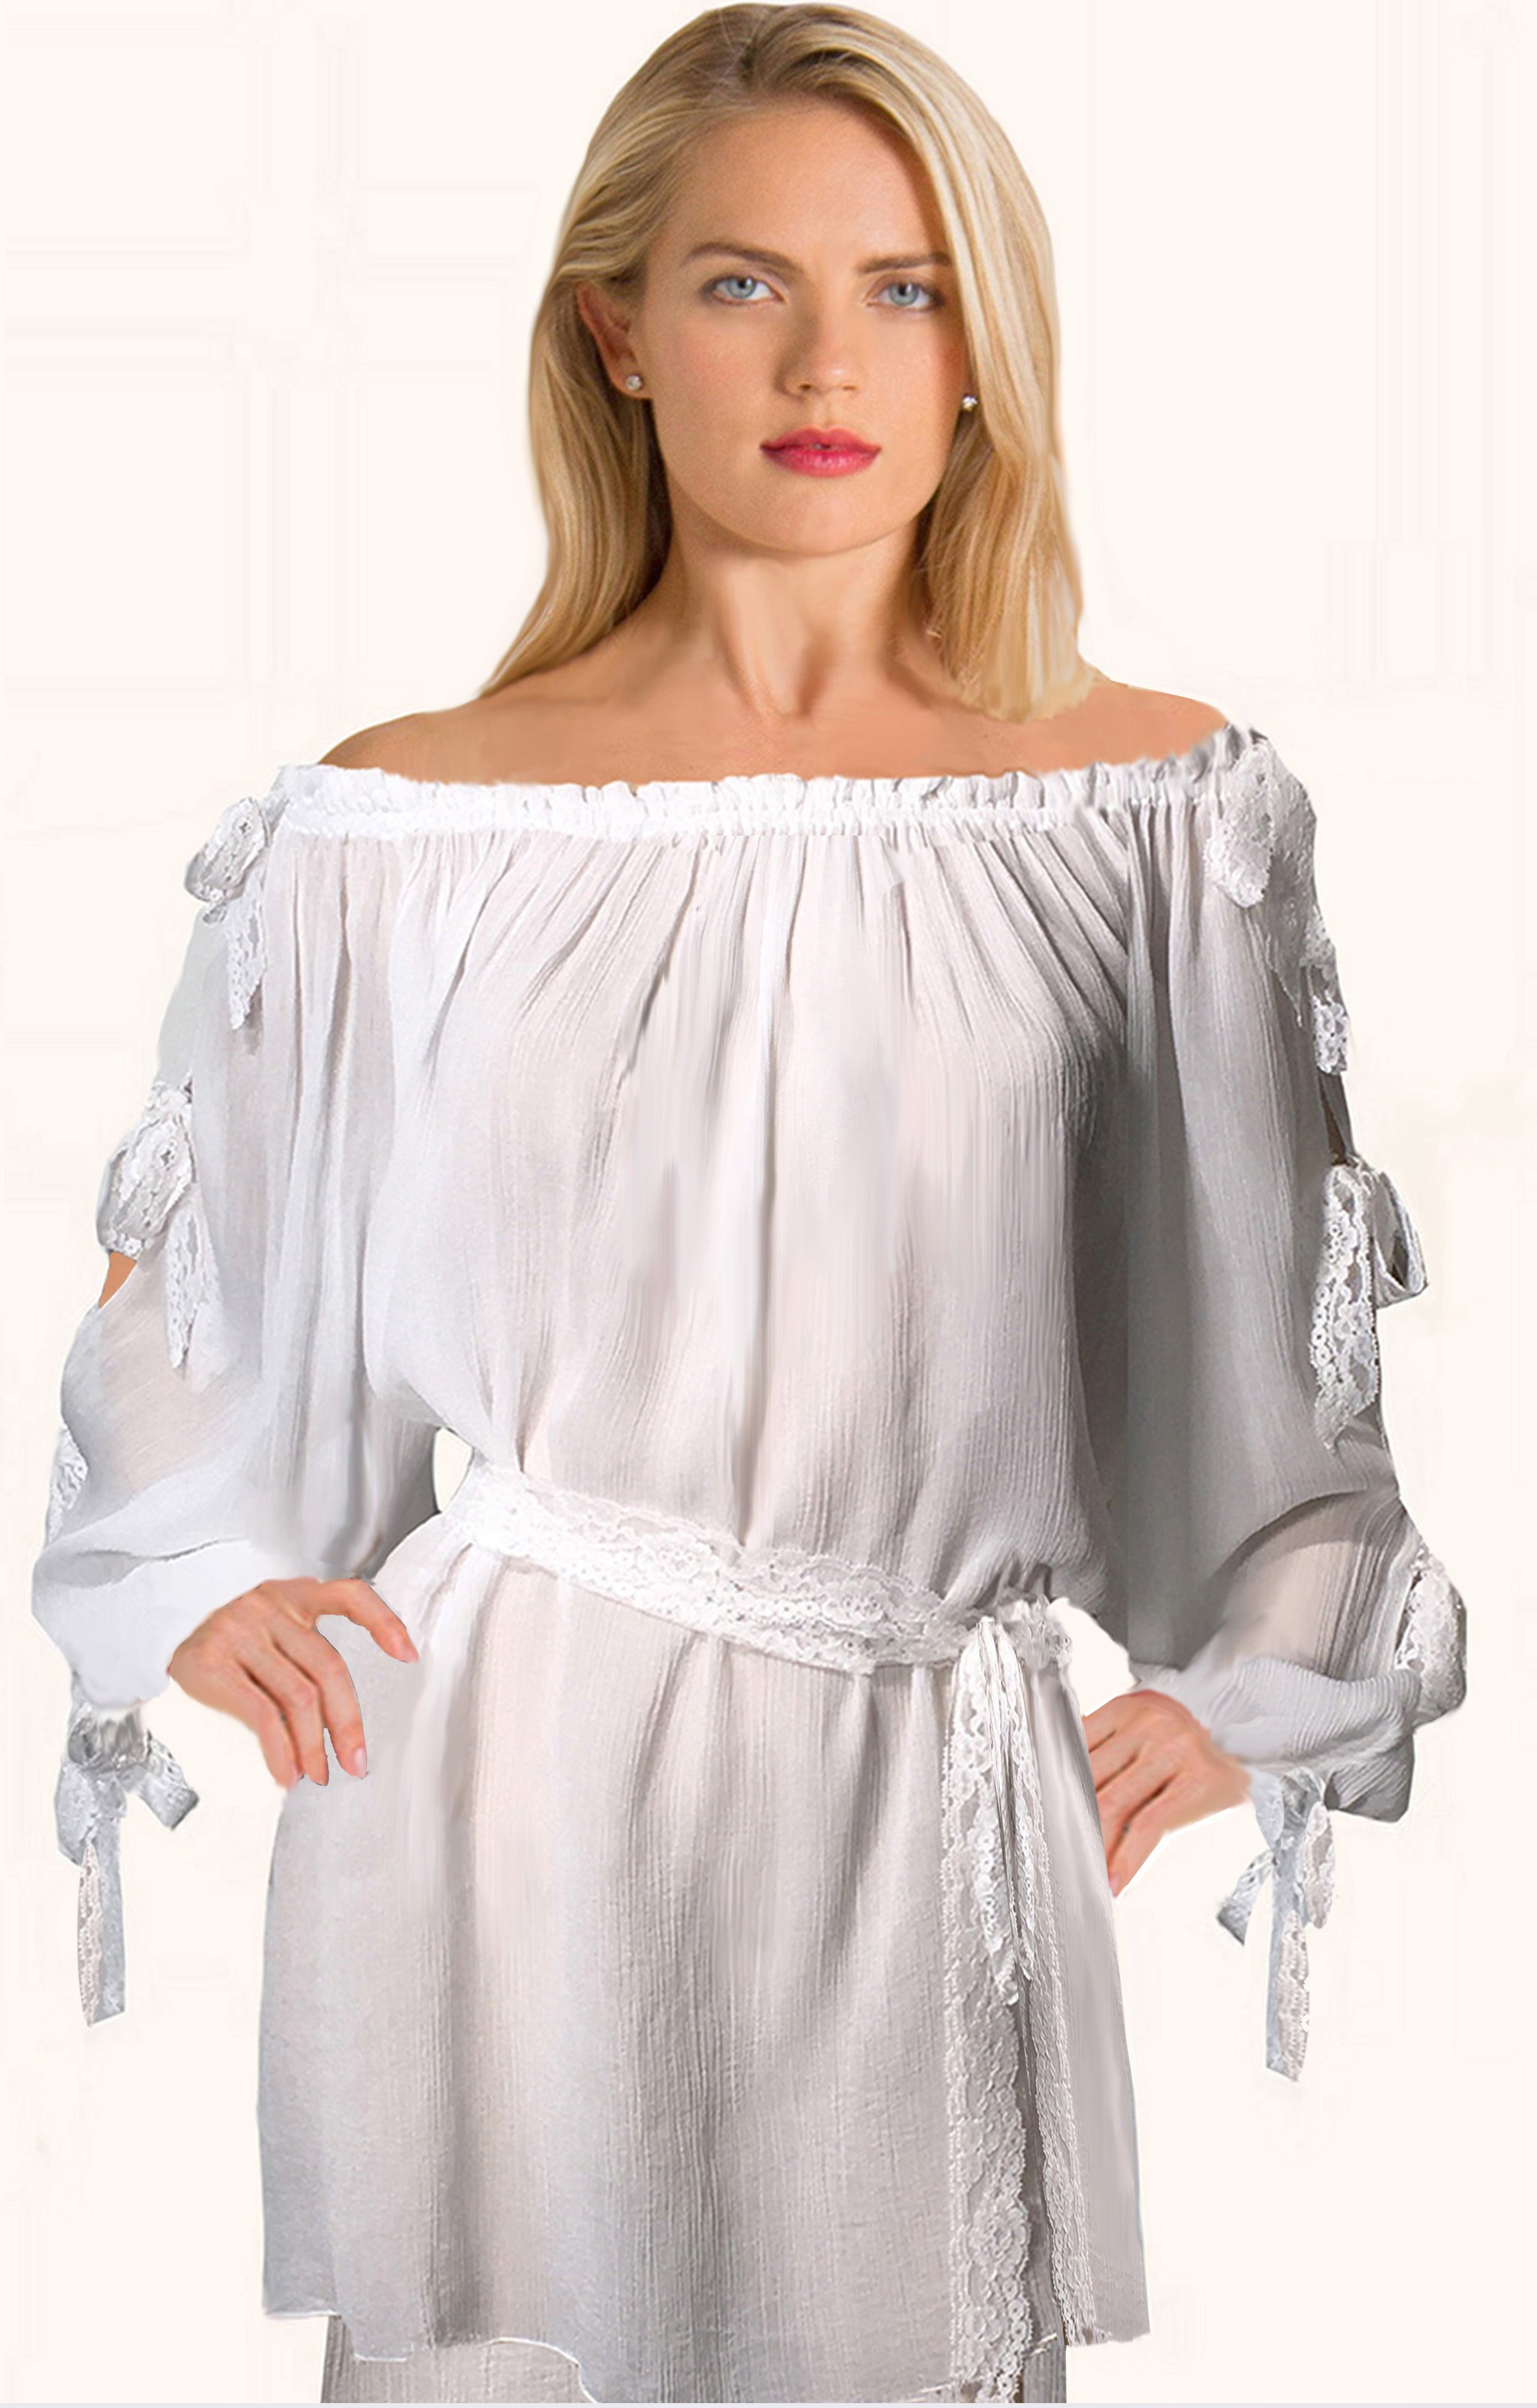 Sara Plisse' Open Sleeve/Lace Bows One Size Blouse - Sale Code Home50off at checkout - Sara Mique Evening Wear